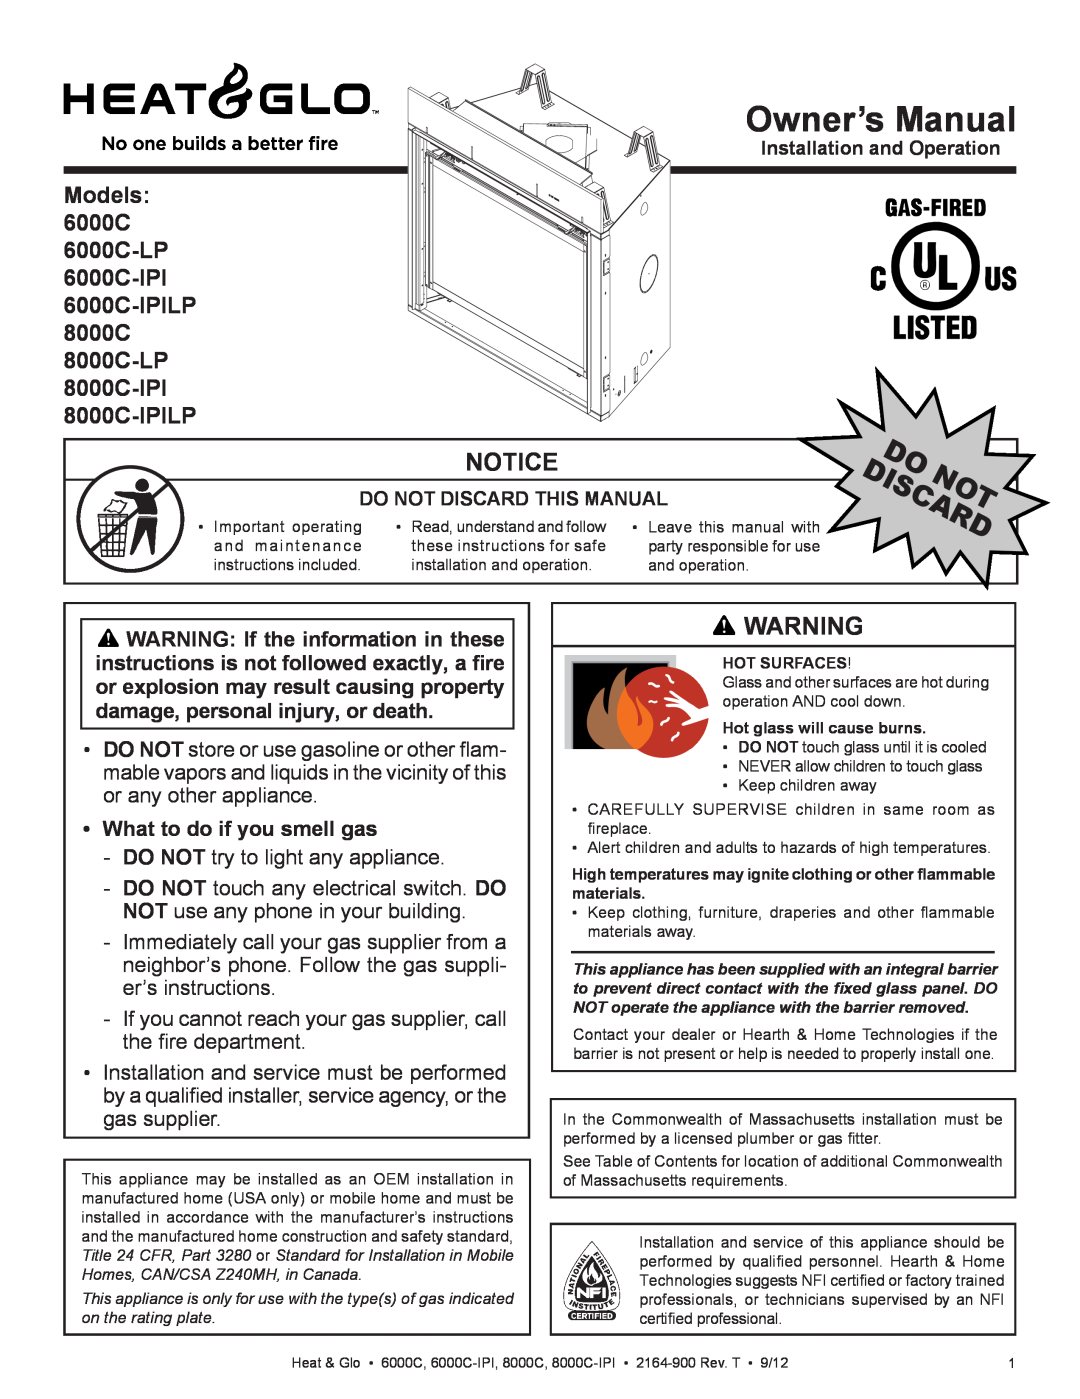 Heat & Glo LifeStyle 6000C manual Notice, •What to do if you smell gas, Owner’s Manual, 8000C-LP 8000C-IPI 8000C-IPILP 